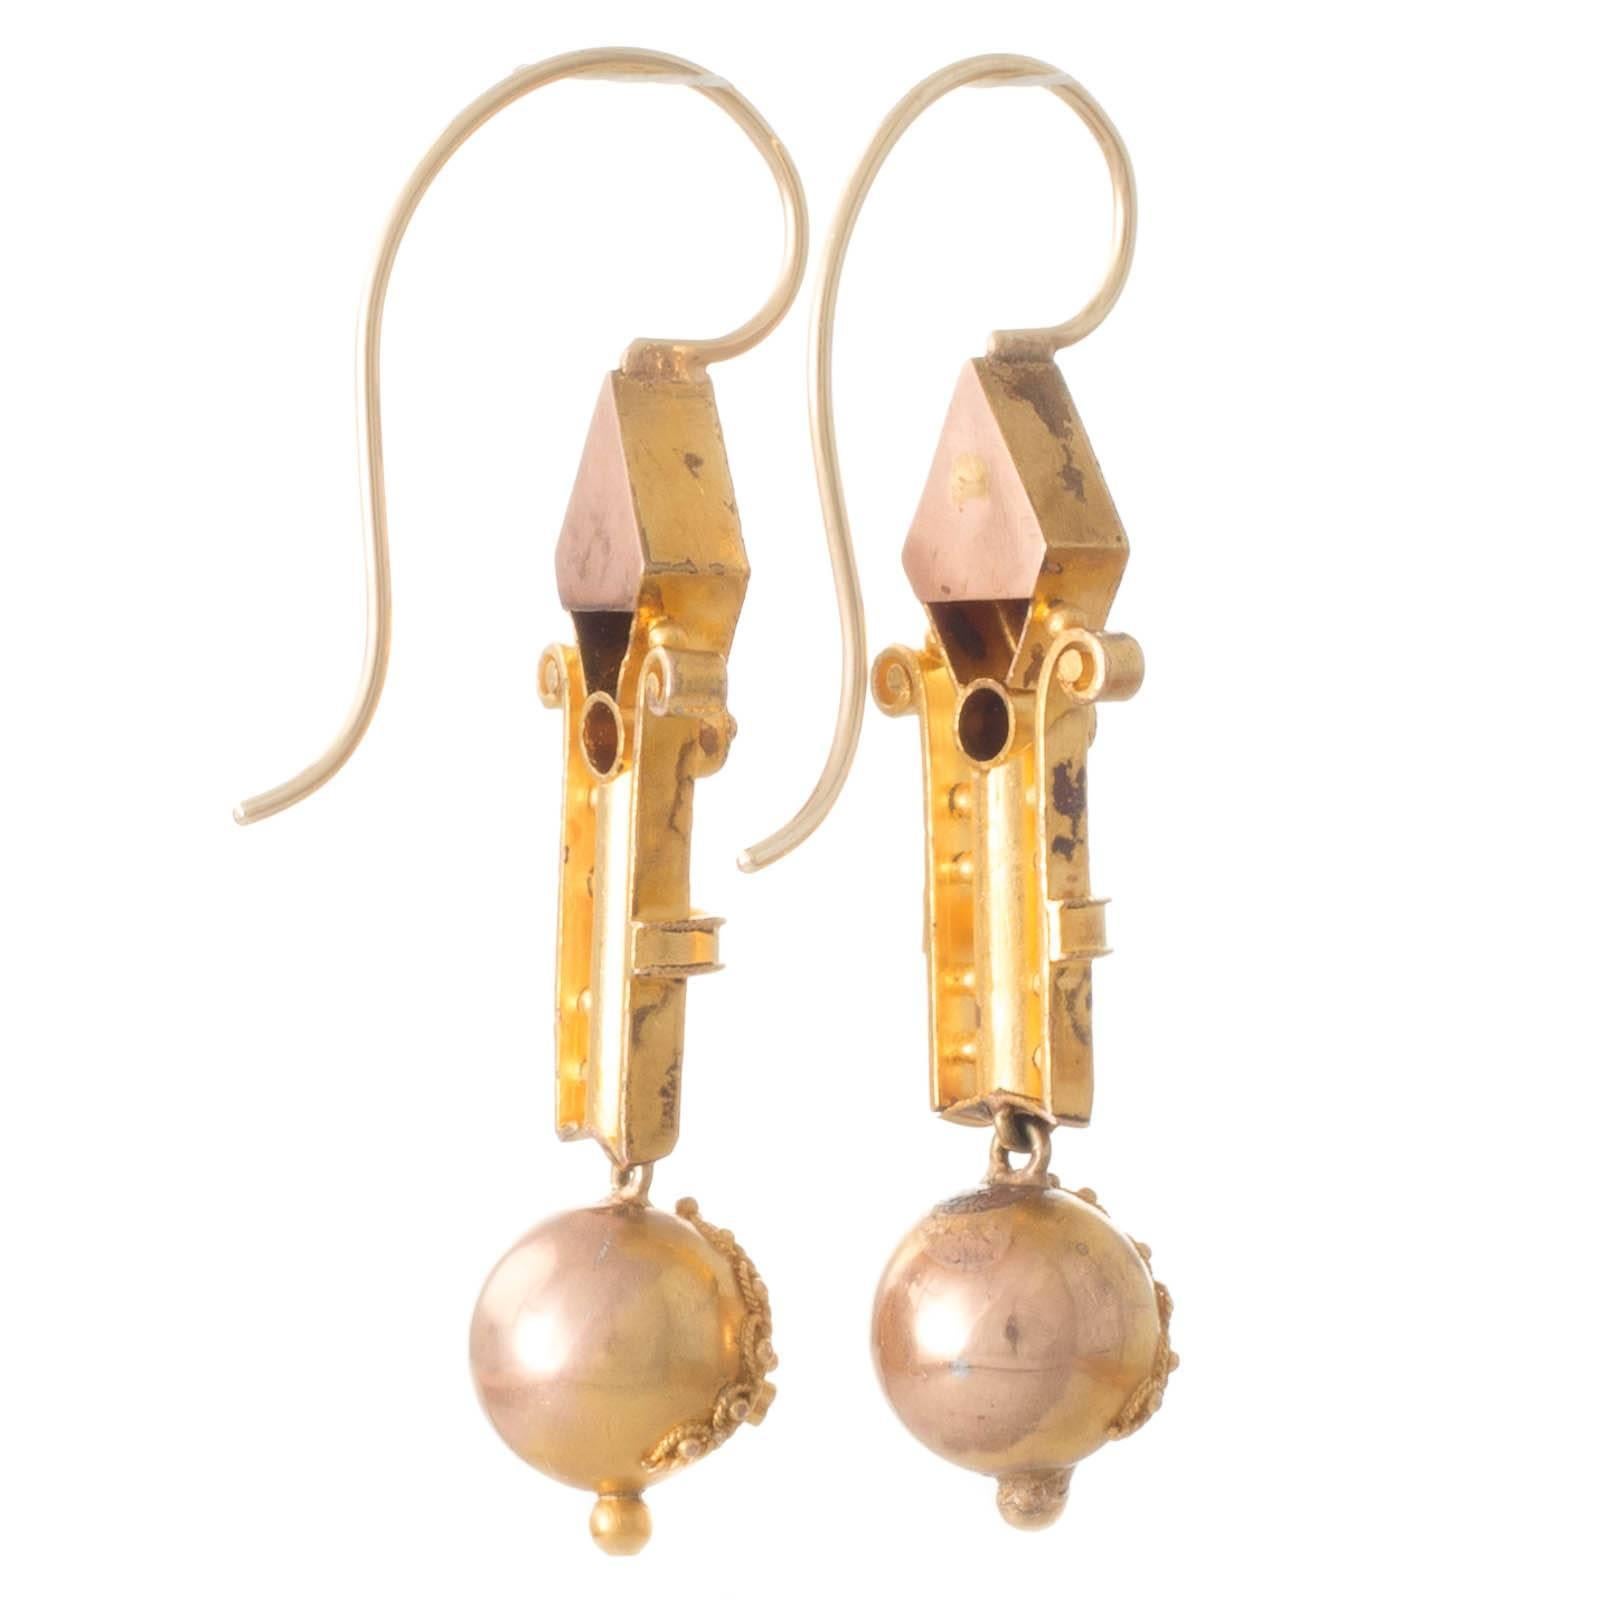 A pair of 15ct yellow gold mid Victorian earrings made in the Etruscan style each featuring a round ball at the base with applied gold wirework suspended beneath a long polished gold bar bordered either side by fine gold wires with scrolling tops